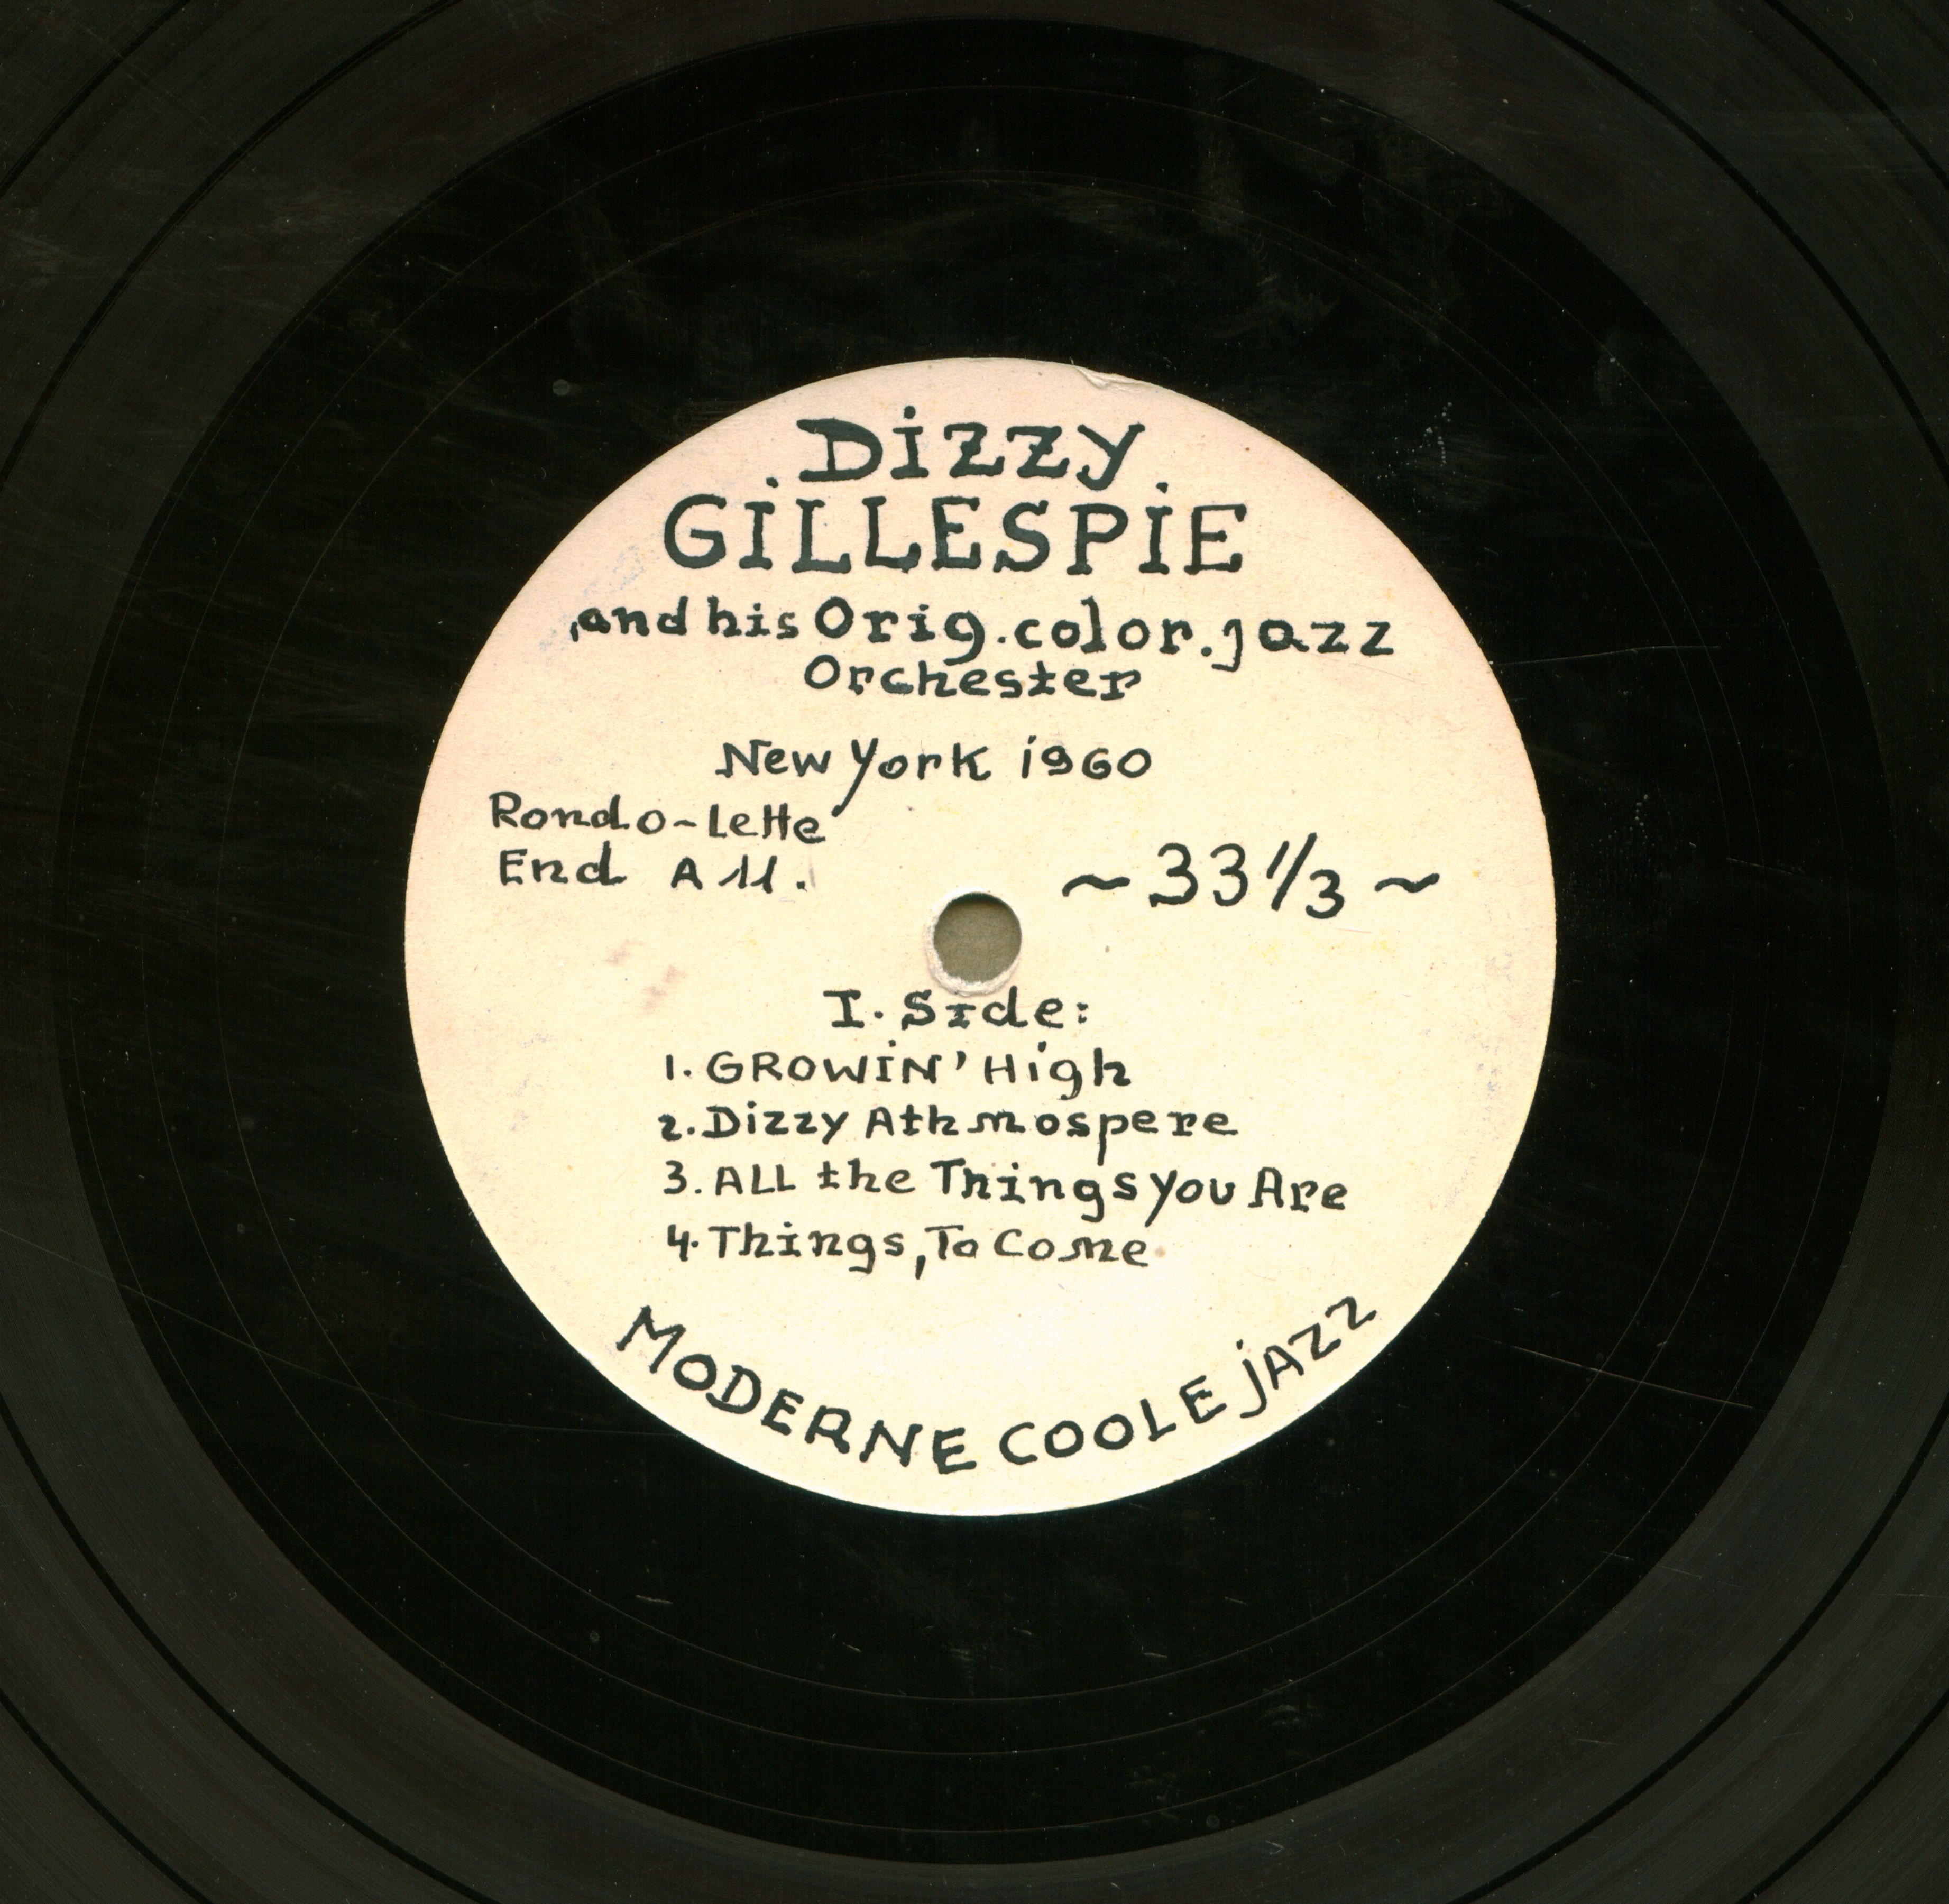 Dizzy Gillespie and his Orig. color jazz orchester New York 1960